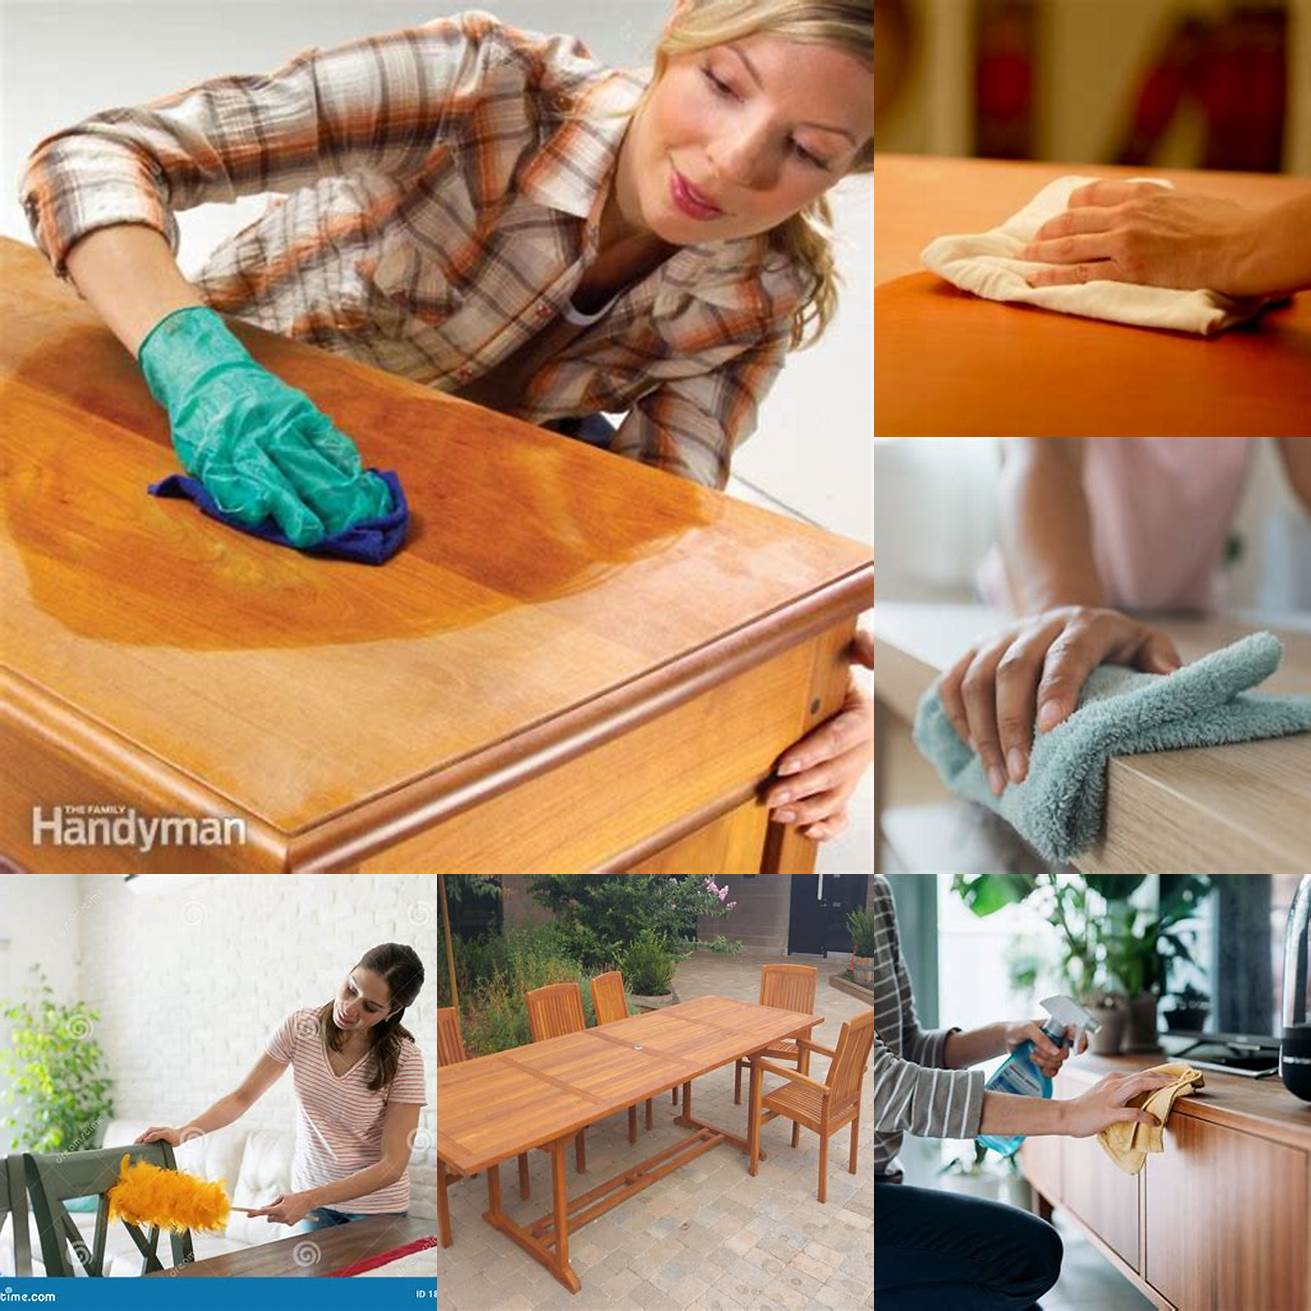 An image of a teak table and chairs being dusted